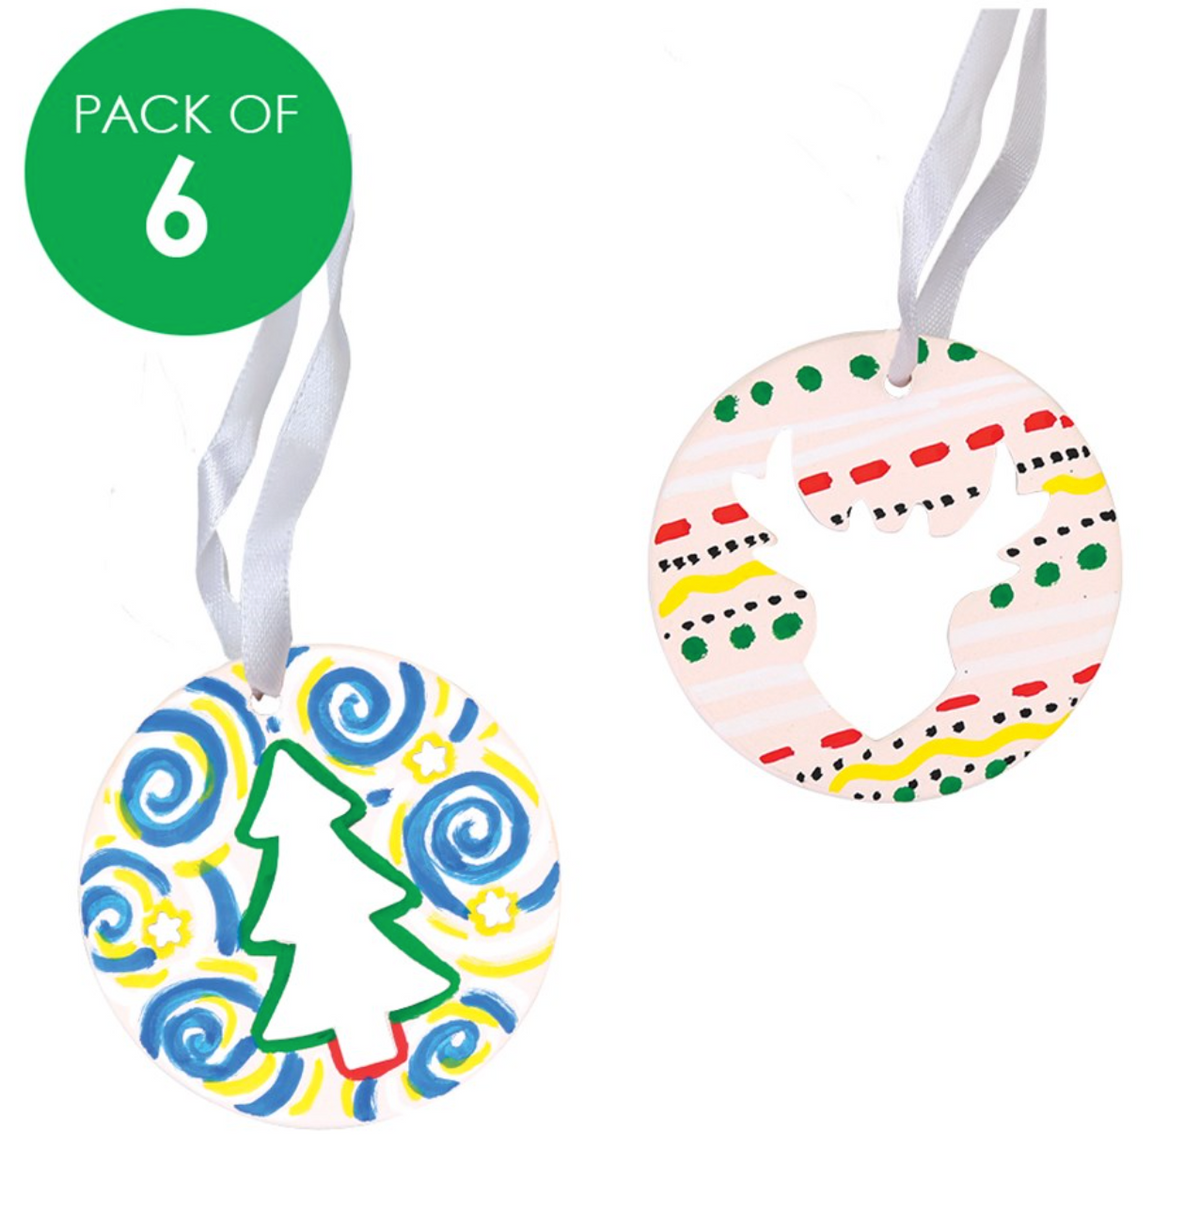 Ceramic Christmas Ornaments Pack of 6